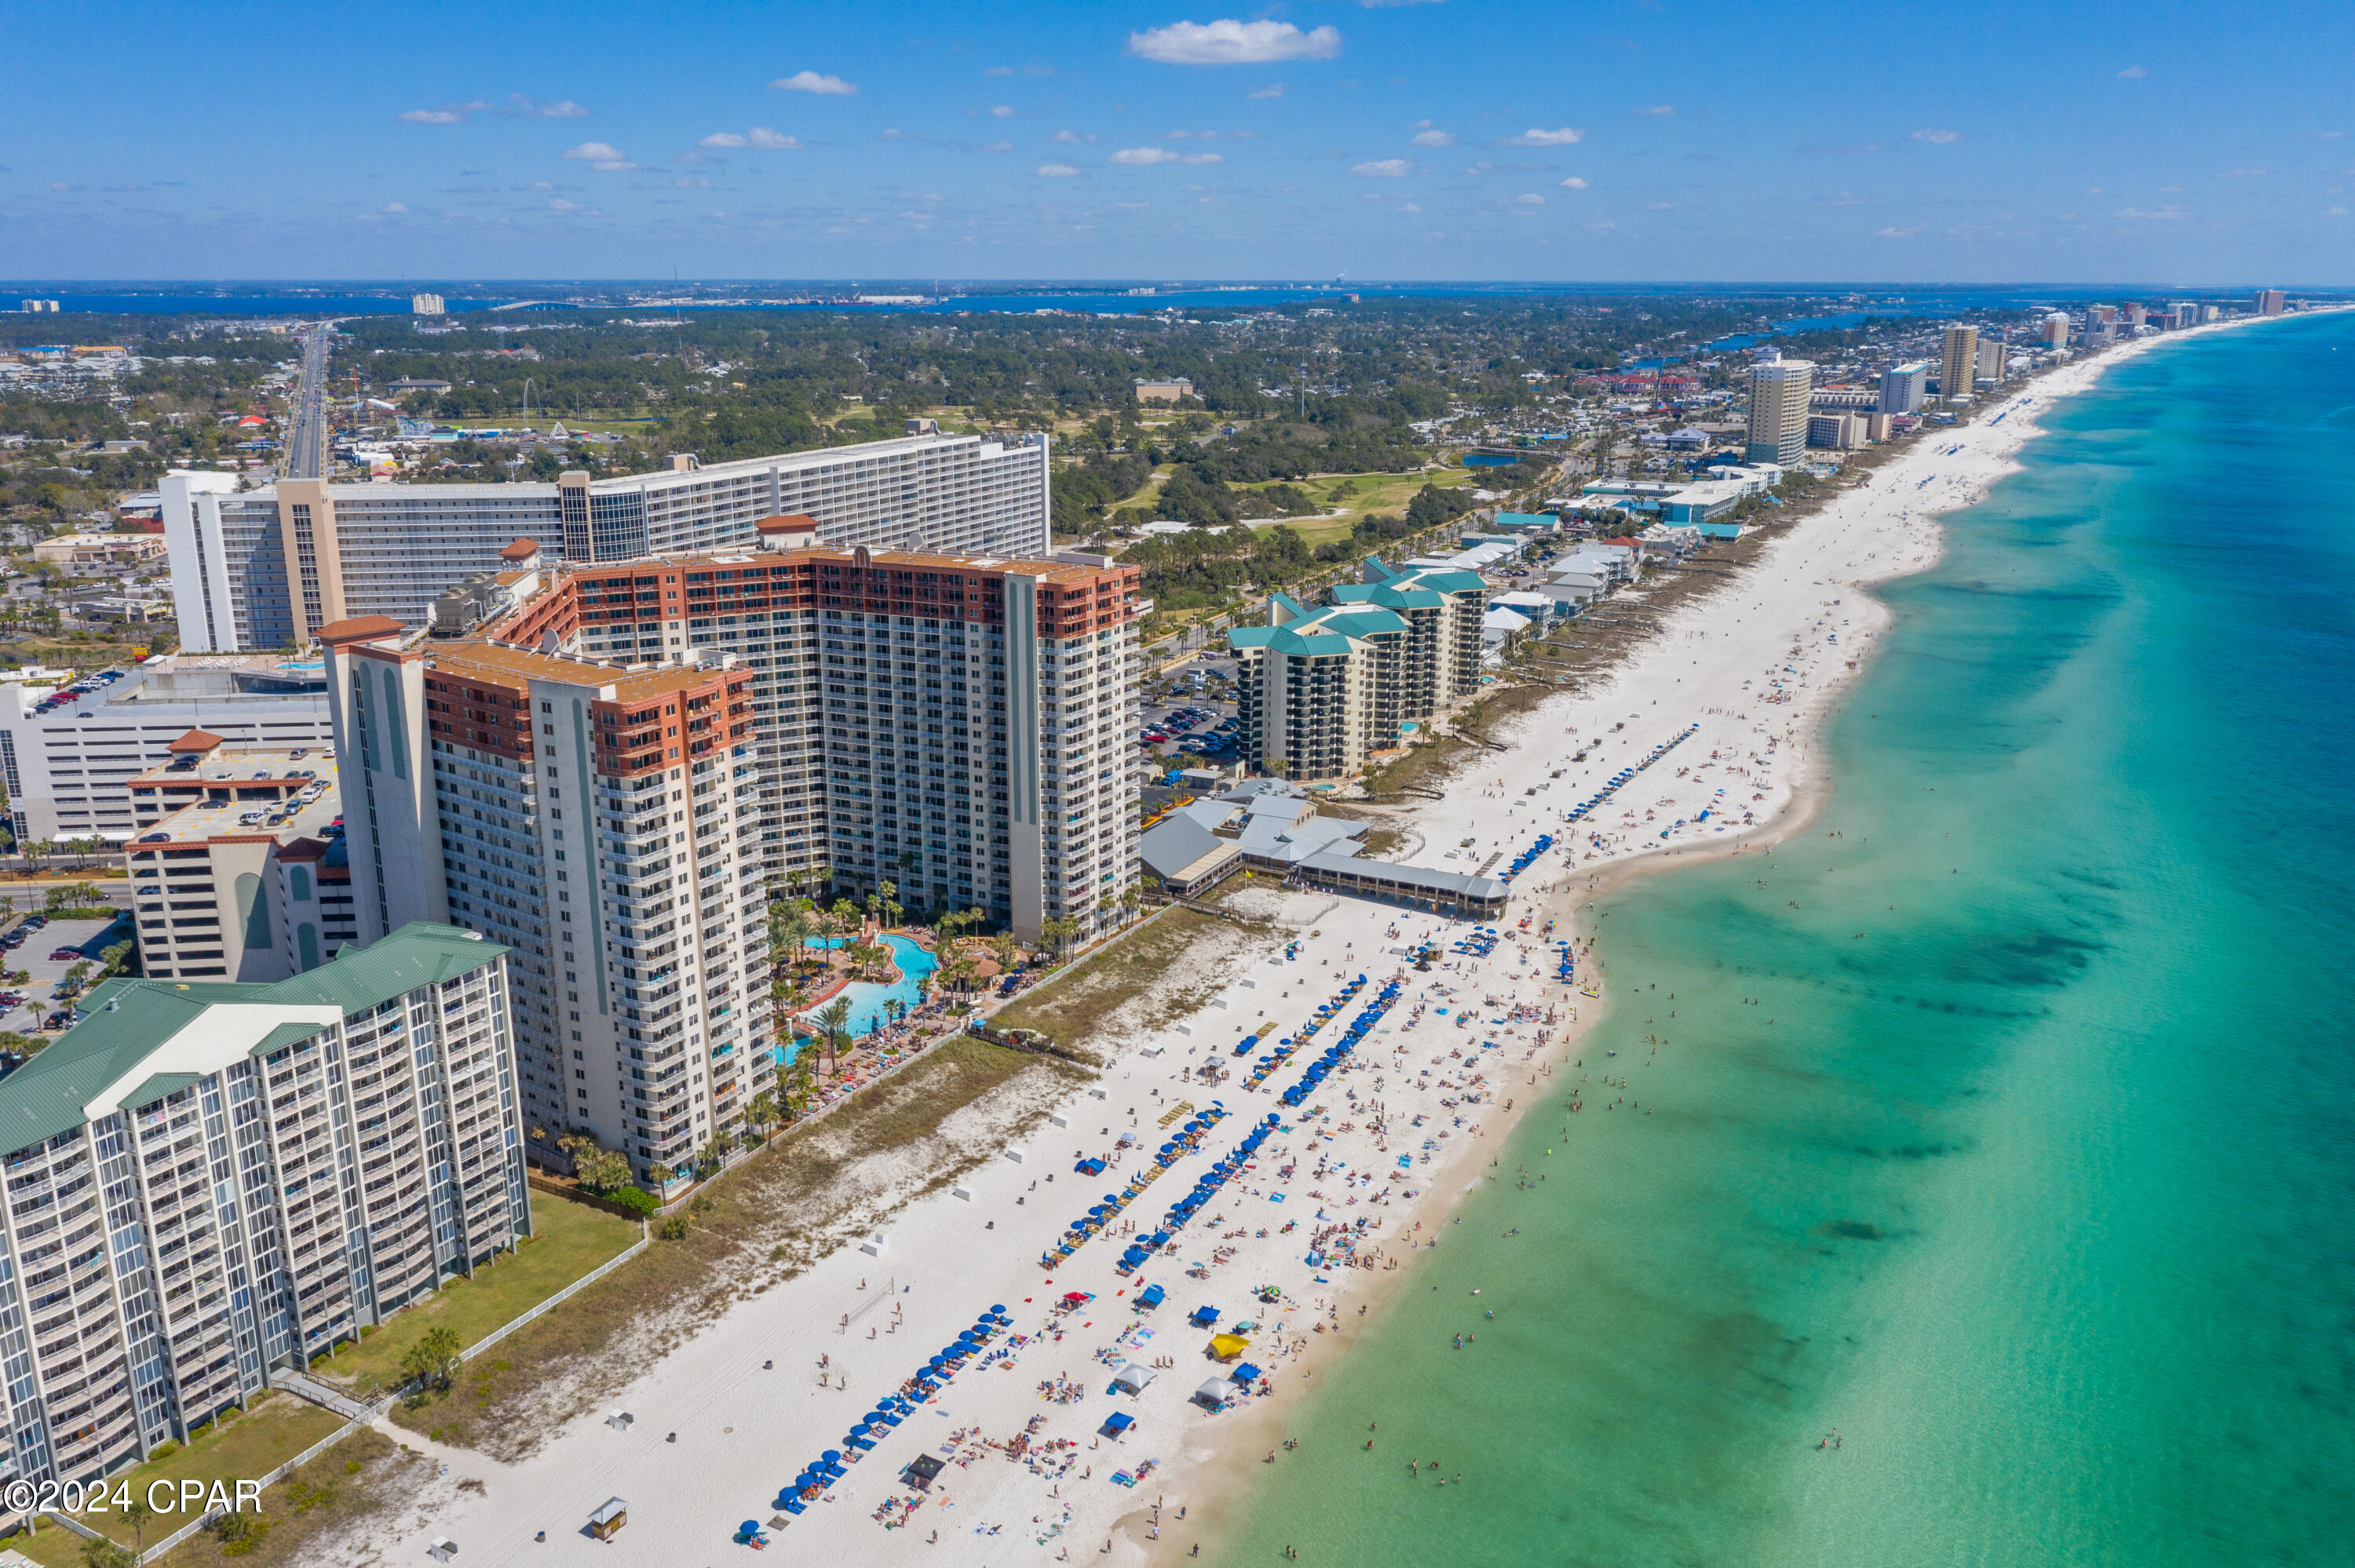 9900 S Thomas Drive Unit 1118, Panama City Beach, Florida, 32408, United States, 2 Bedrooms Bedrooms, ,3 BathroomsBathrooms,Residential,For Sale,9900 S Thomas Drive Unit 1118,1486227